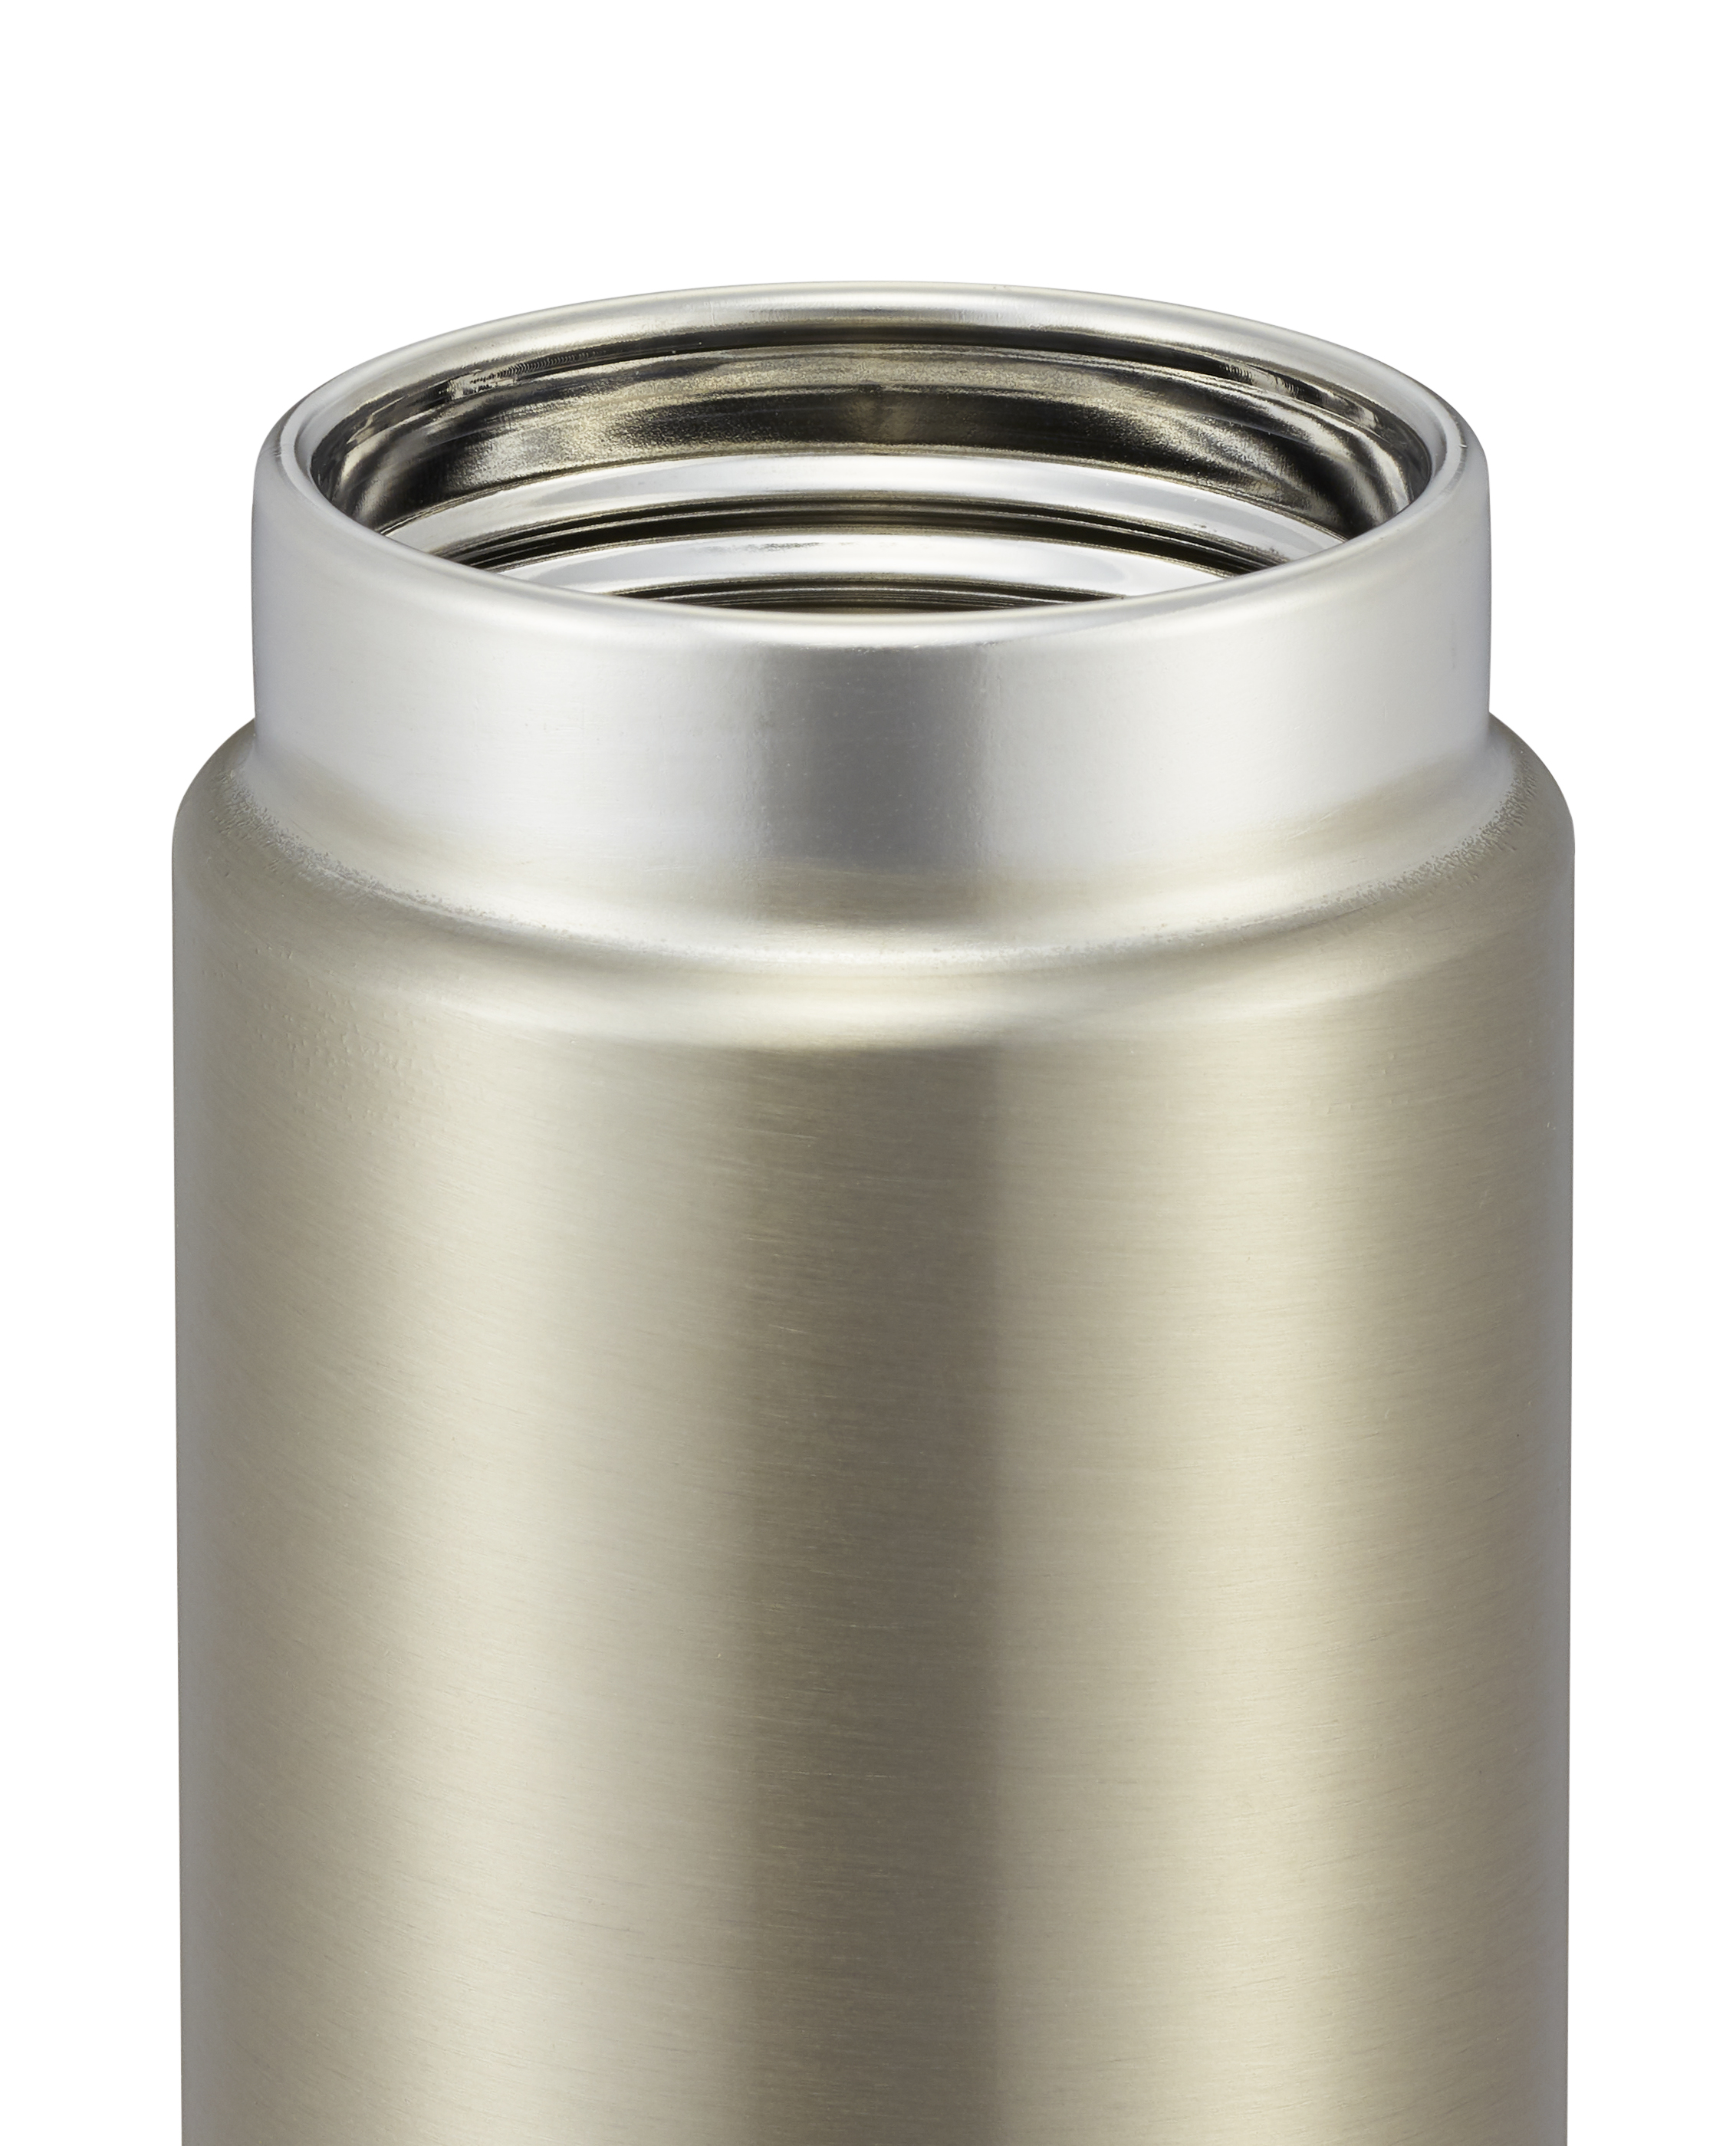 ultra-light-stainless-steel-thermal-bottle-mmz-a2-smooth-as-ceramic-mug.jpg (2.12 MB)